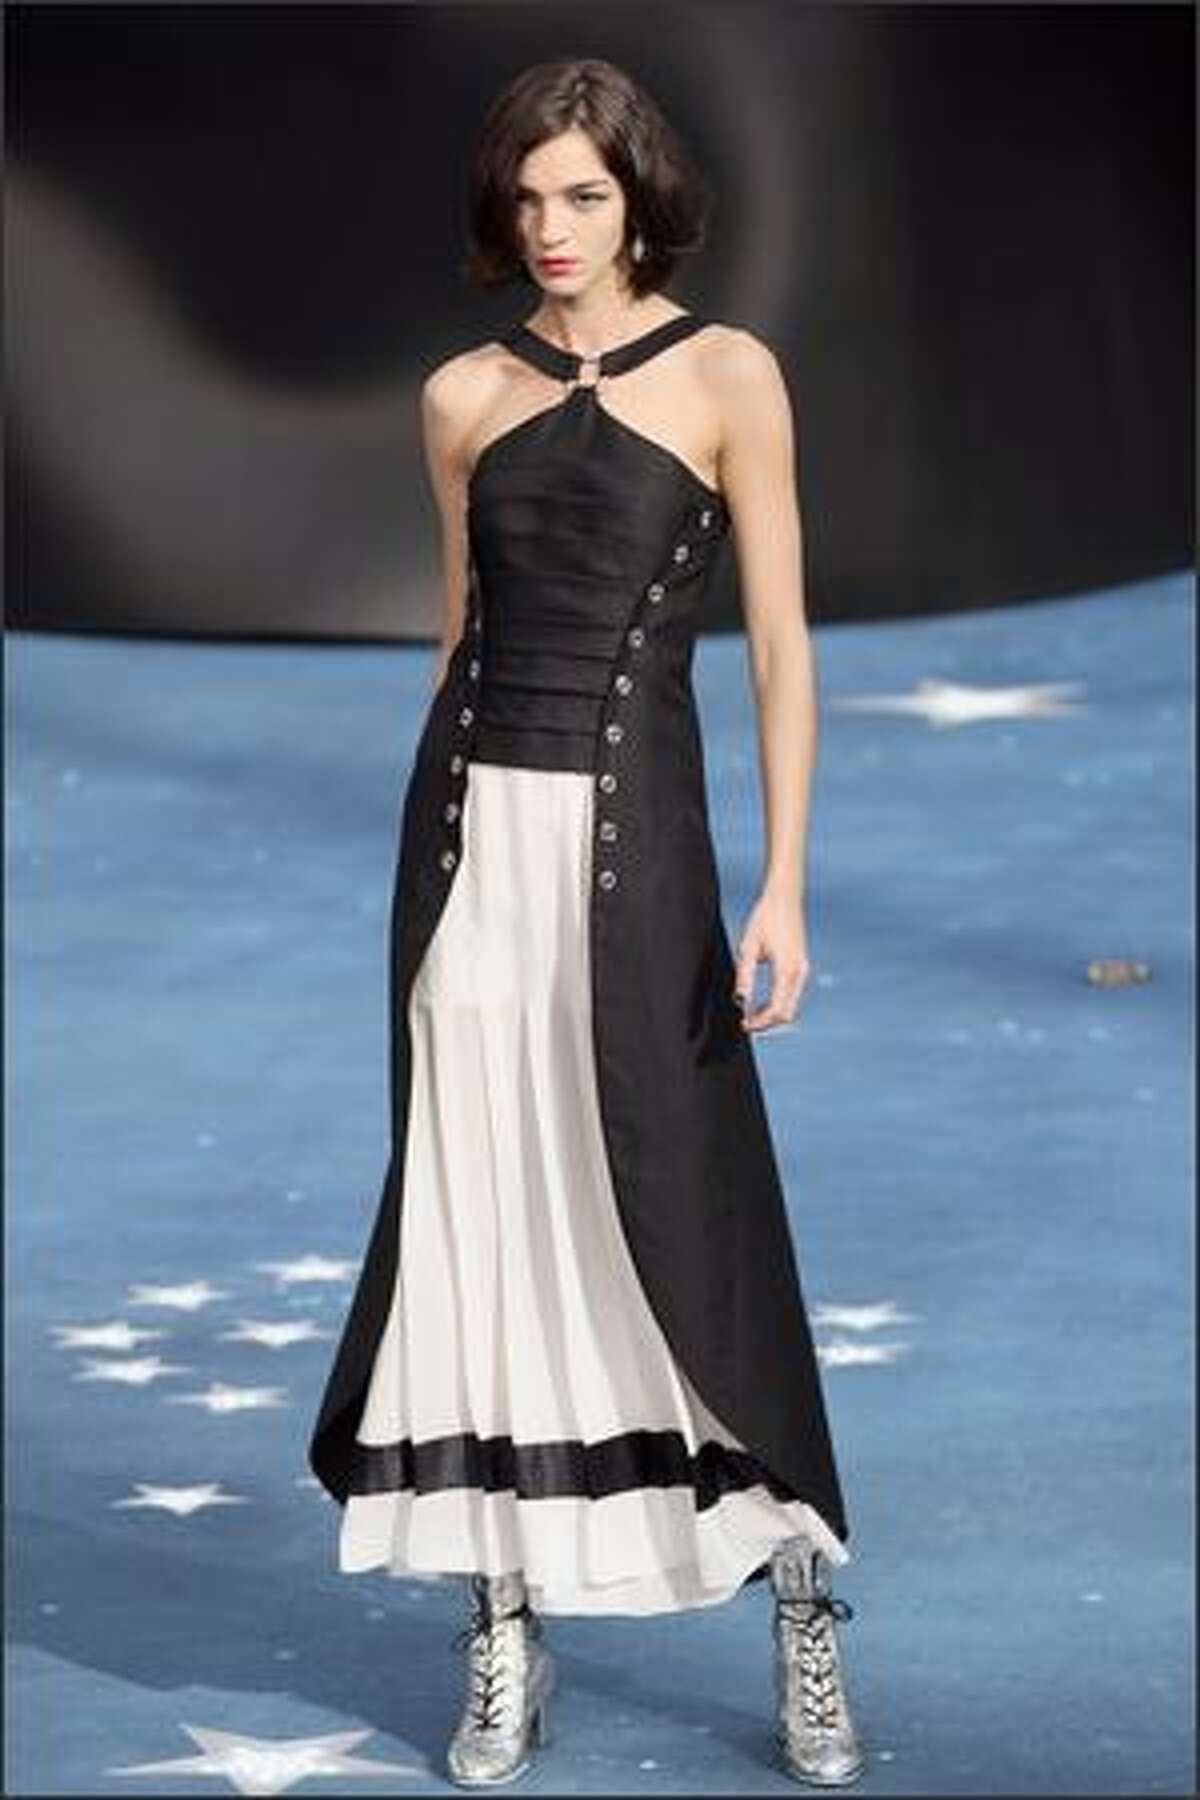 Italian model Maria Cala Boscono presents a creation by Lagerfeld for Chanel during Spring/Summer 2008 ready-to-wear collection show in Paris.